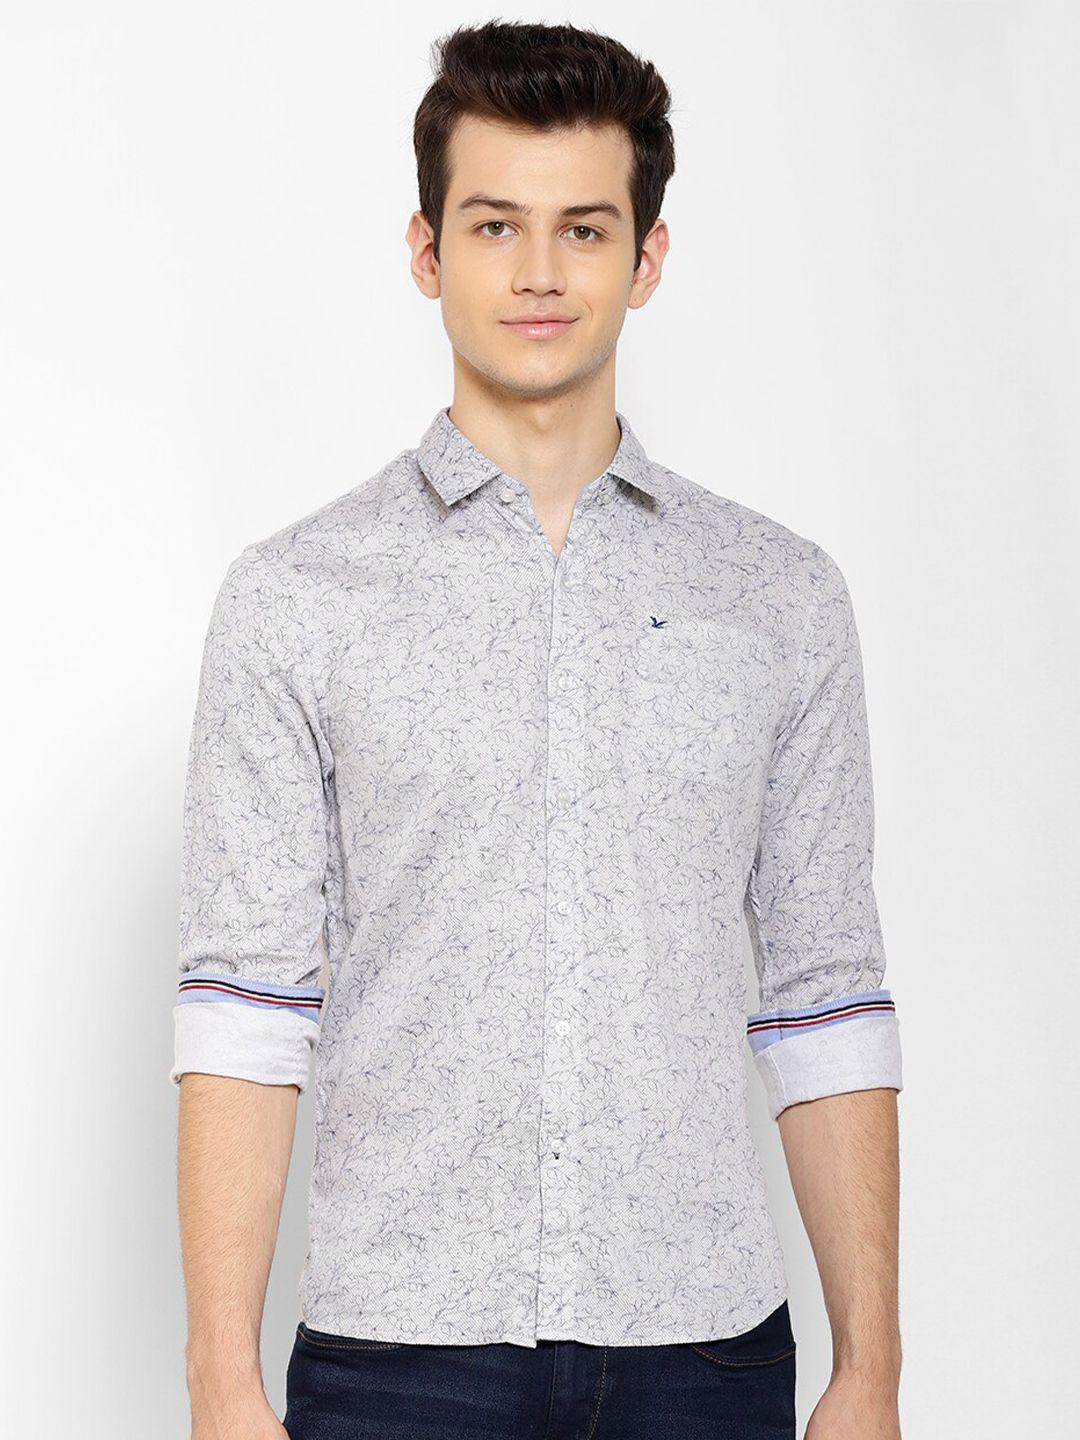 cape-canary-men-grey-smart-floral-printed-casual-shirt